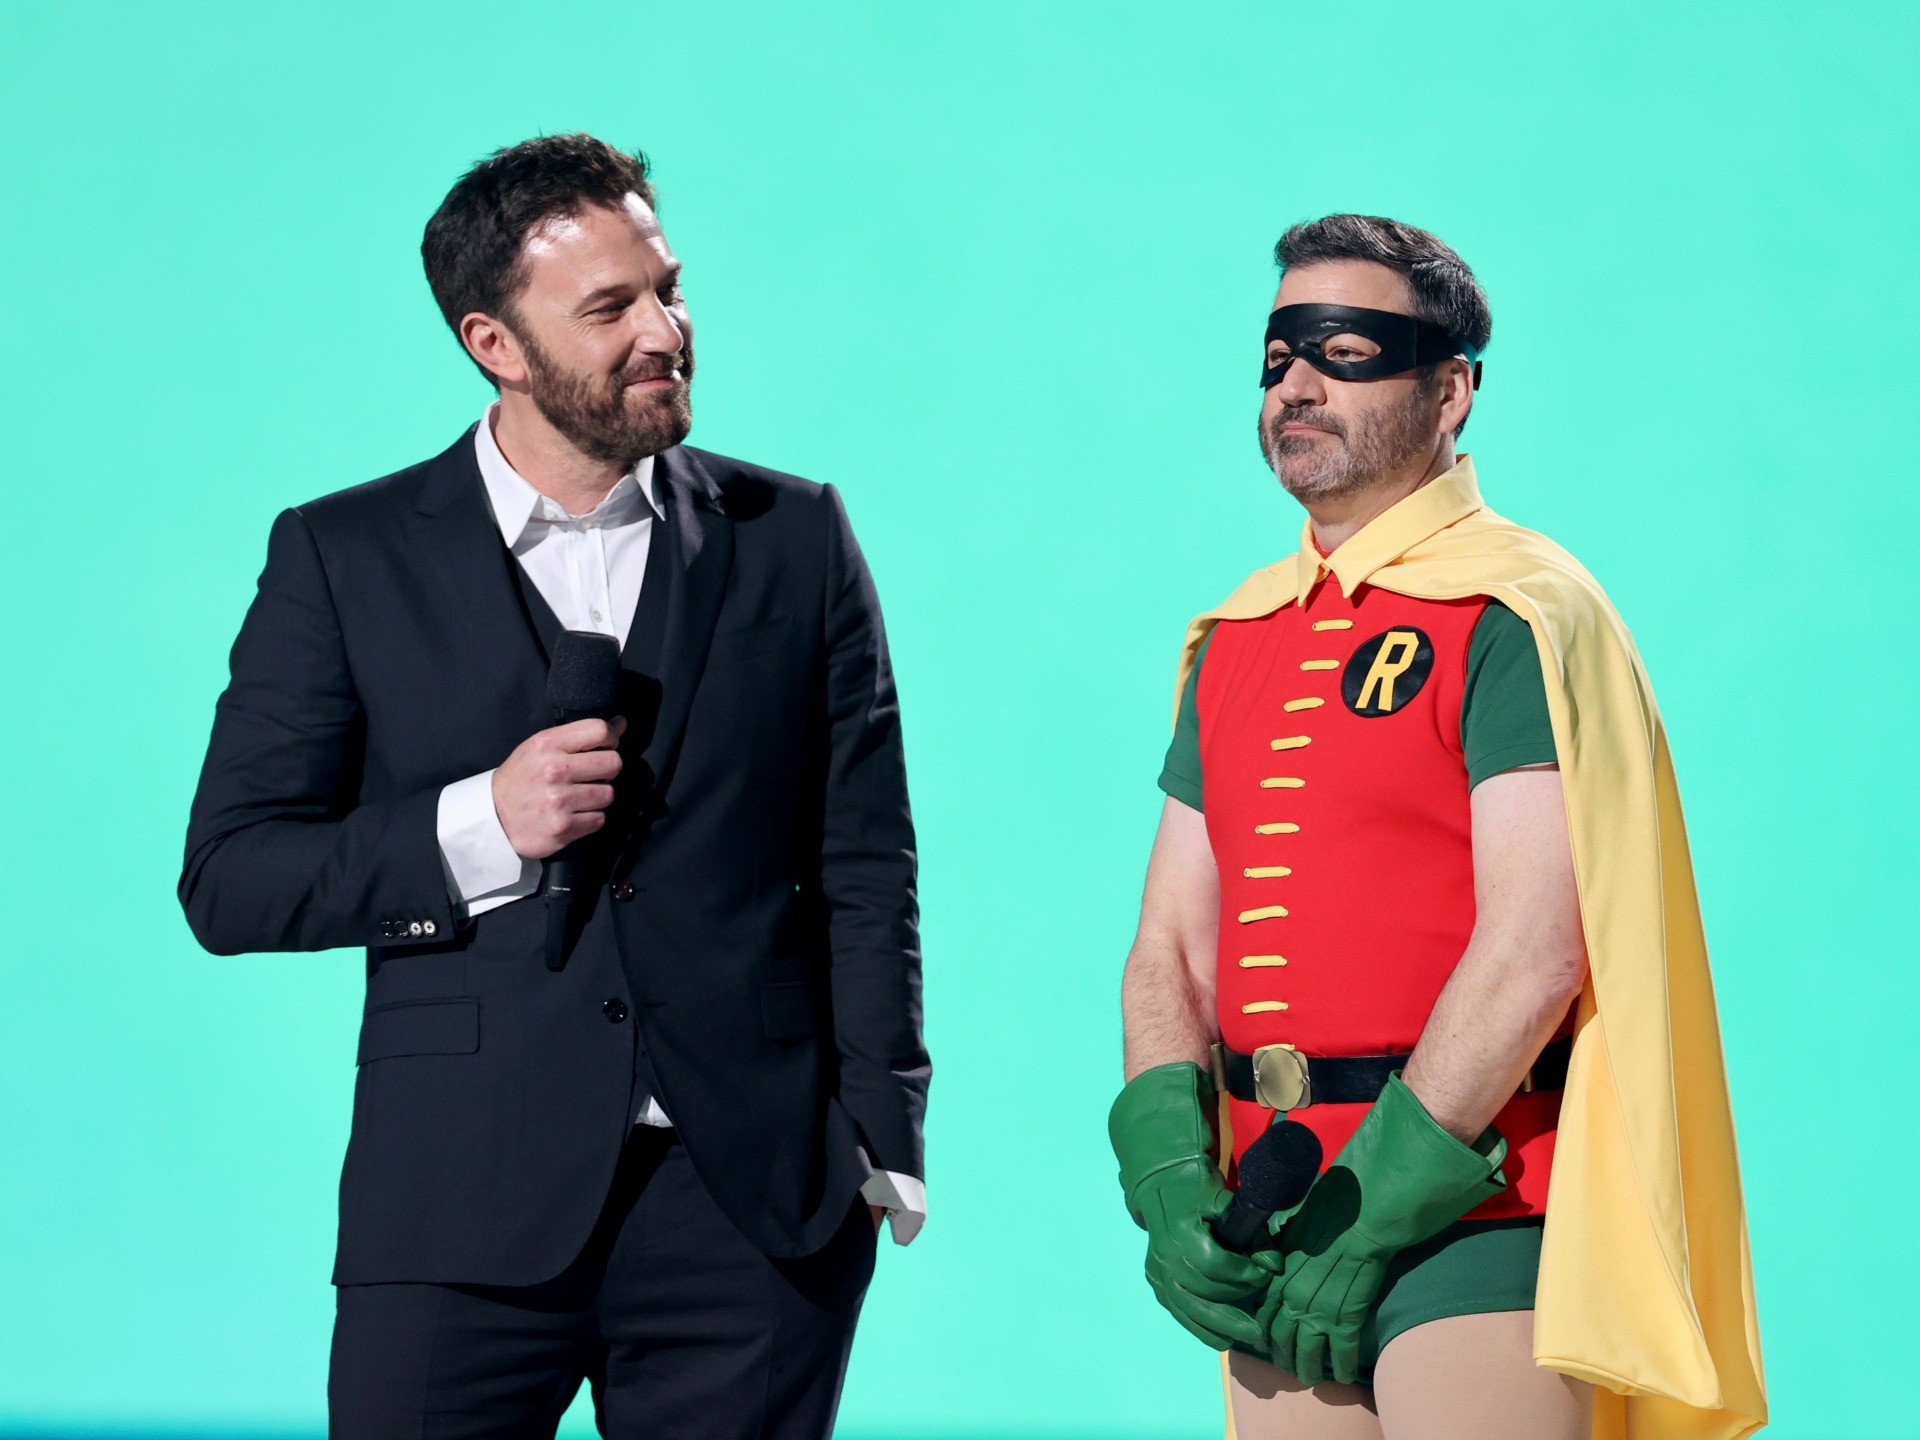 INGLEWOOD, CALIFORNIA: In this image released on May 2, (L-R) Ben Affleck and Jimmy Kimmel (in costume as Robin) speak onstage during Global Citizen VAX LIVE: The Concert To Reunite The World at SoFi Stadium in Inglewood, California. Global Citizen VAX LIVE: The Concert To Reunite The World will be broadcast on May 8, 2021. (Photo by Kevin Winter/Getty Images for Global Citizen VAX LIVE)